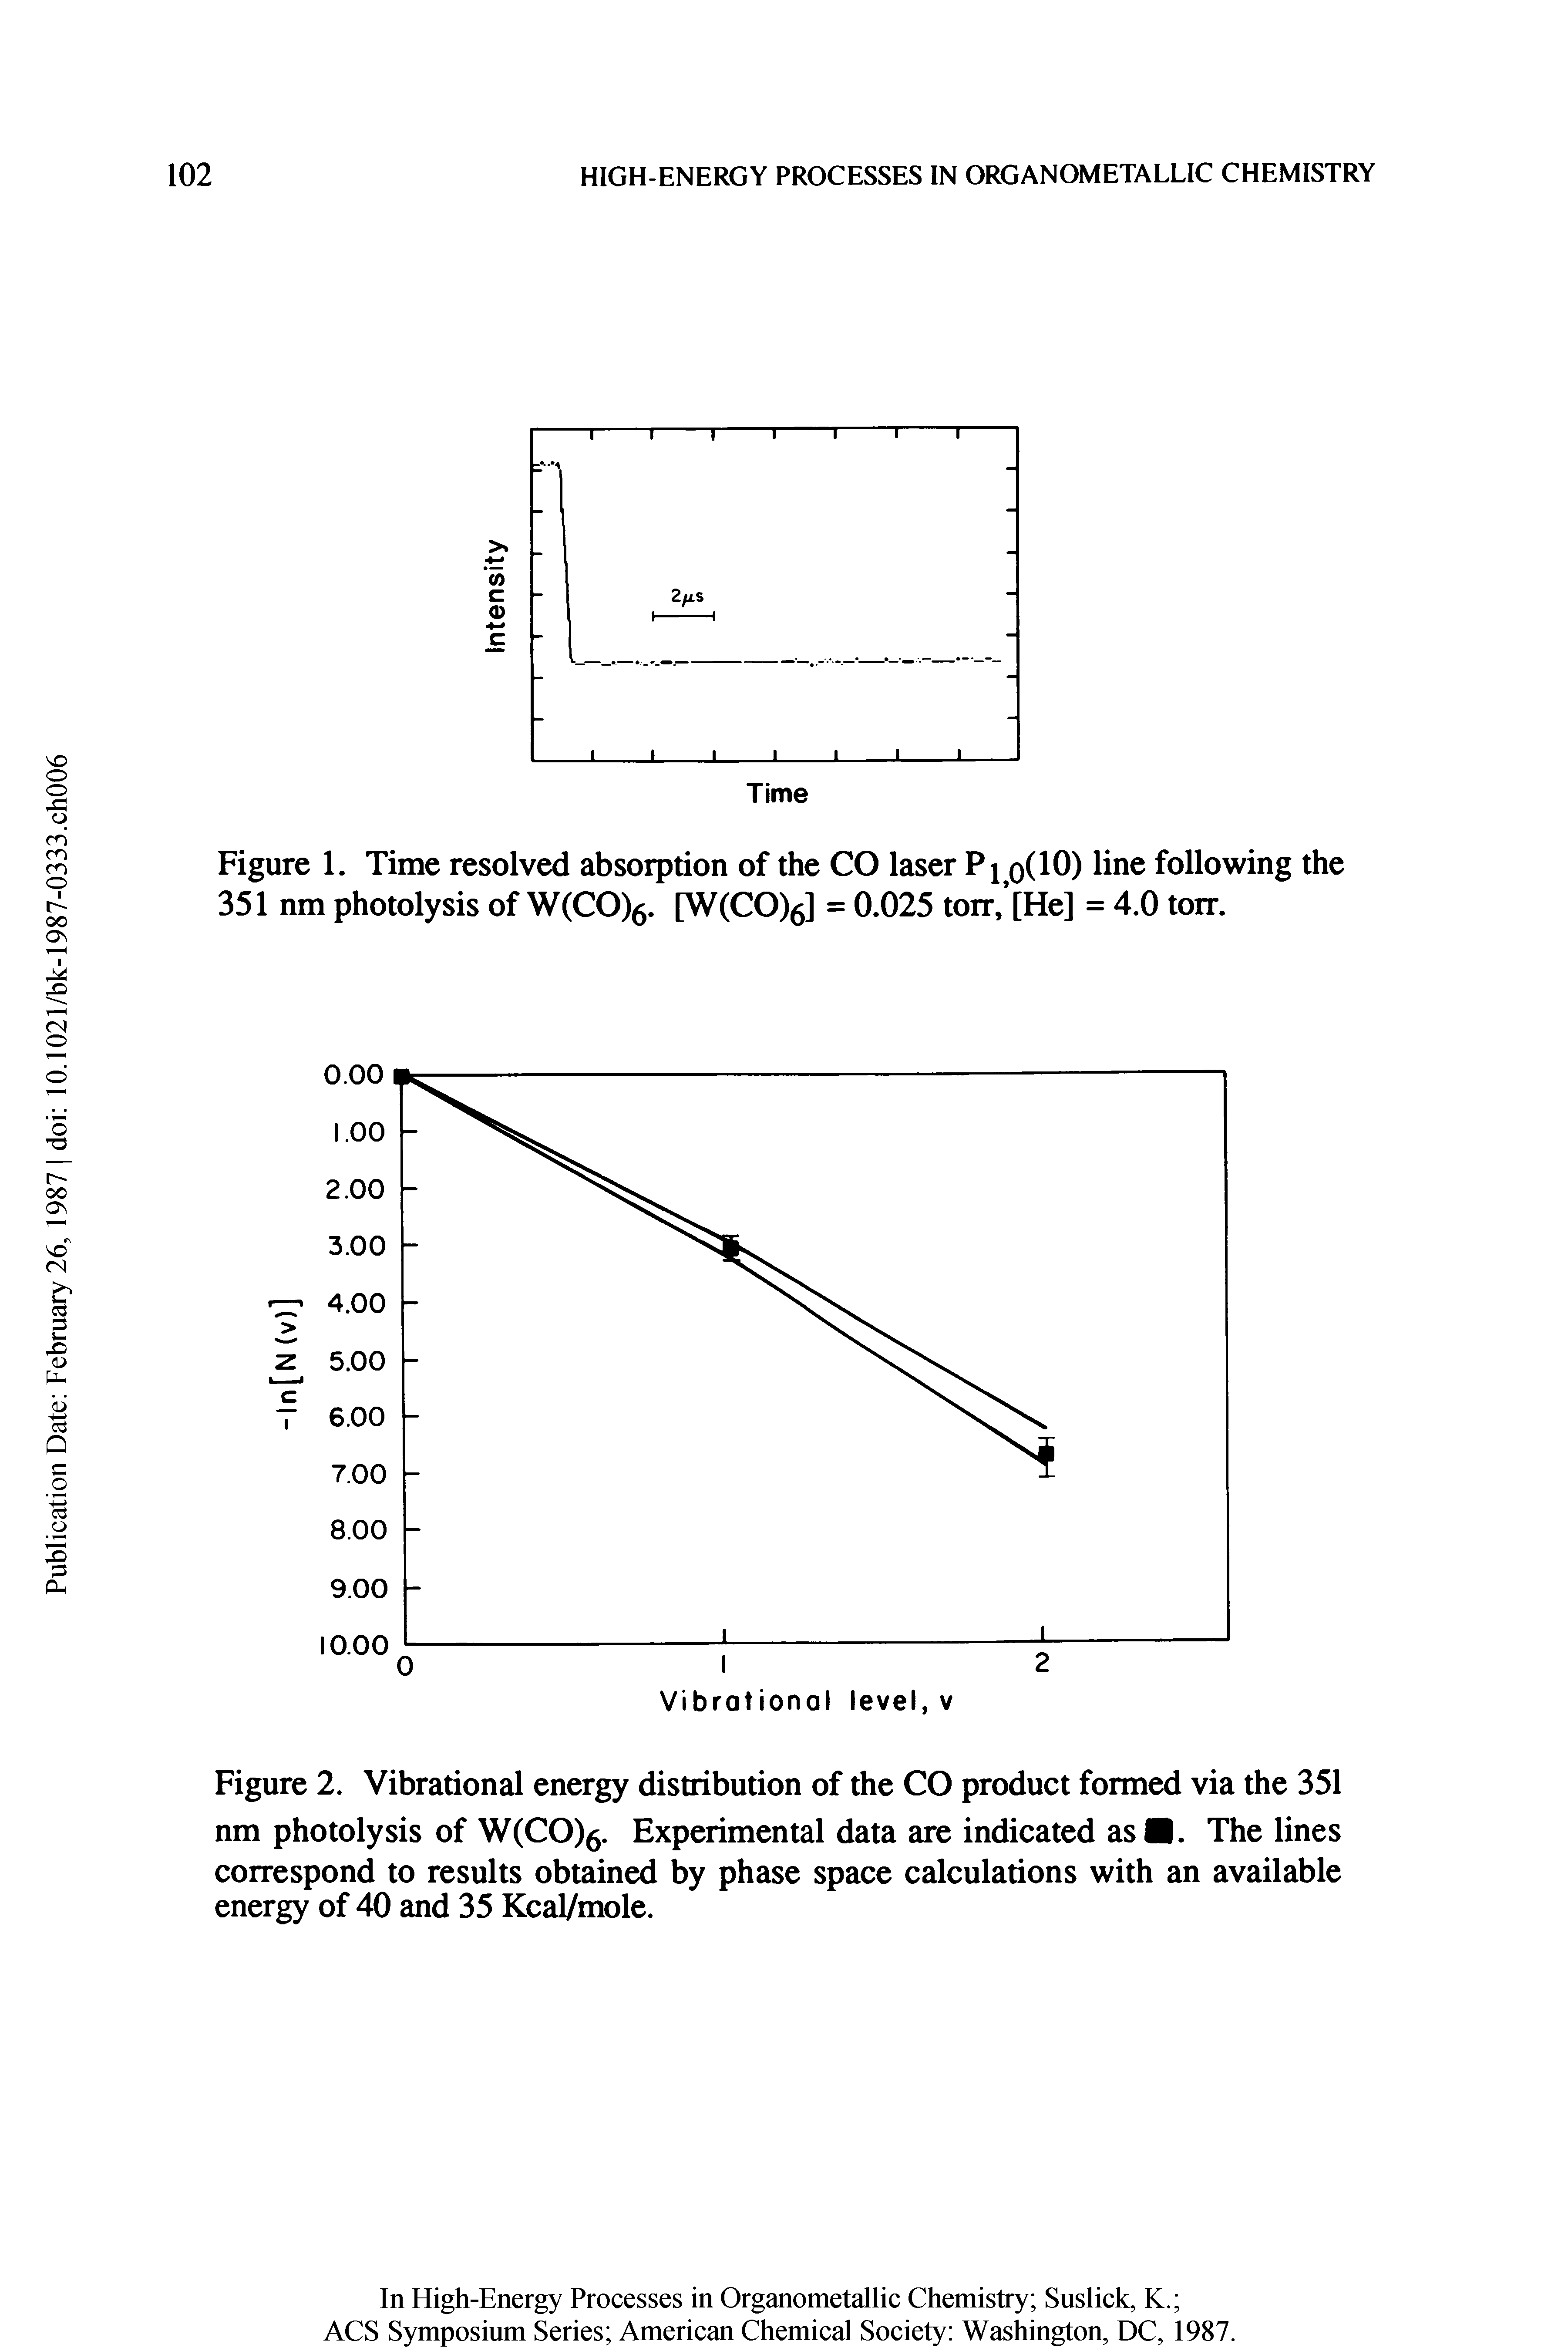 Figure 2. Vibrational energy distribution of the CO product formed via the 351 nm photolysis of W(CO)s. Experimental data are indicated asfl. The lines correspond to results obtained by phase space calculations with an available energy of 40 and 35 Kcal/mole.